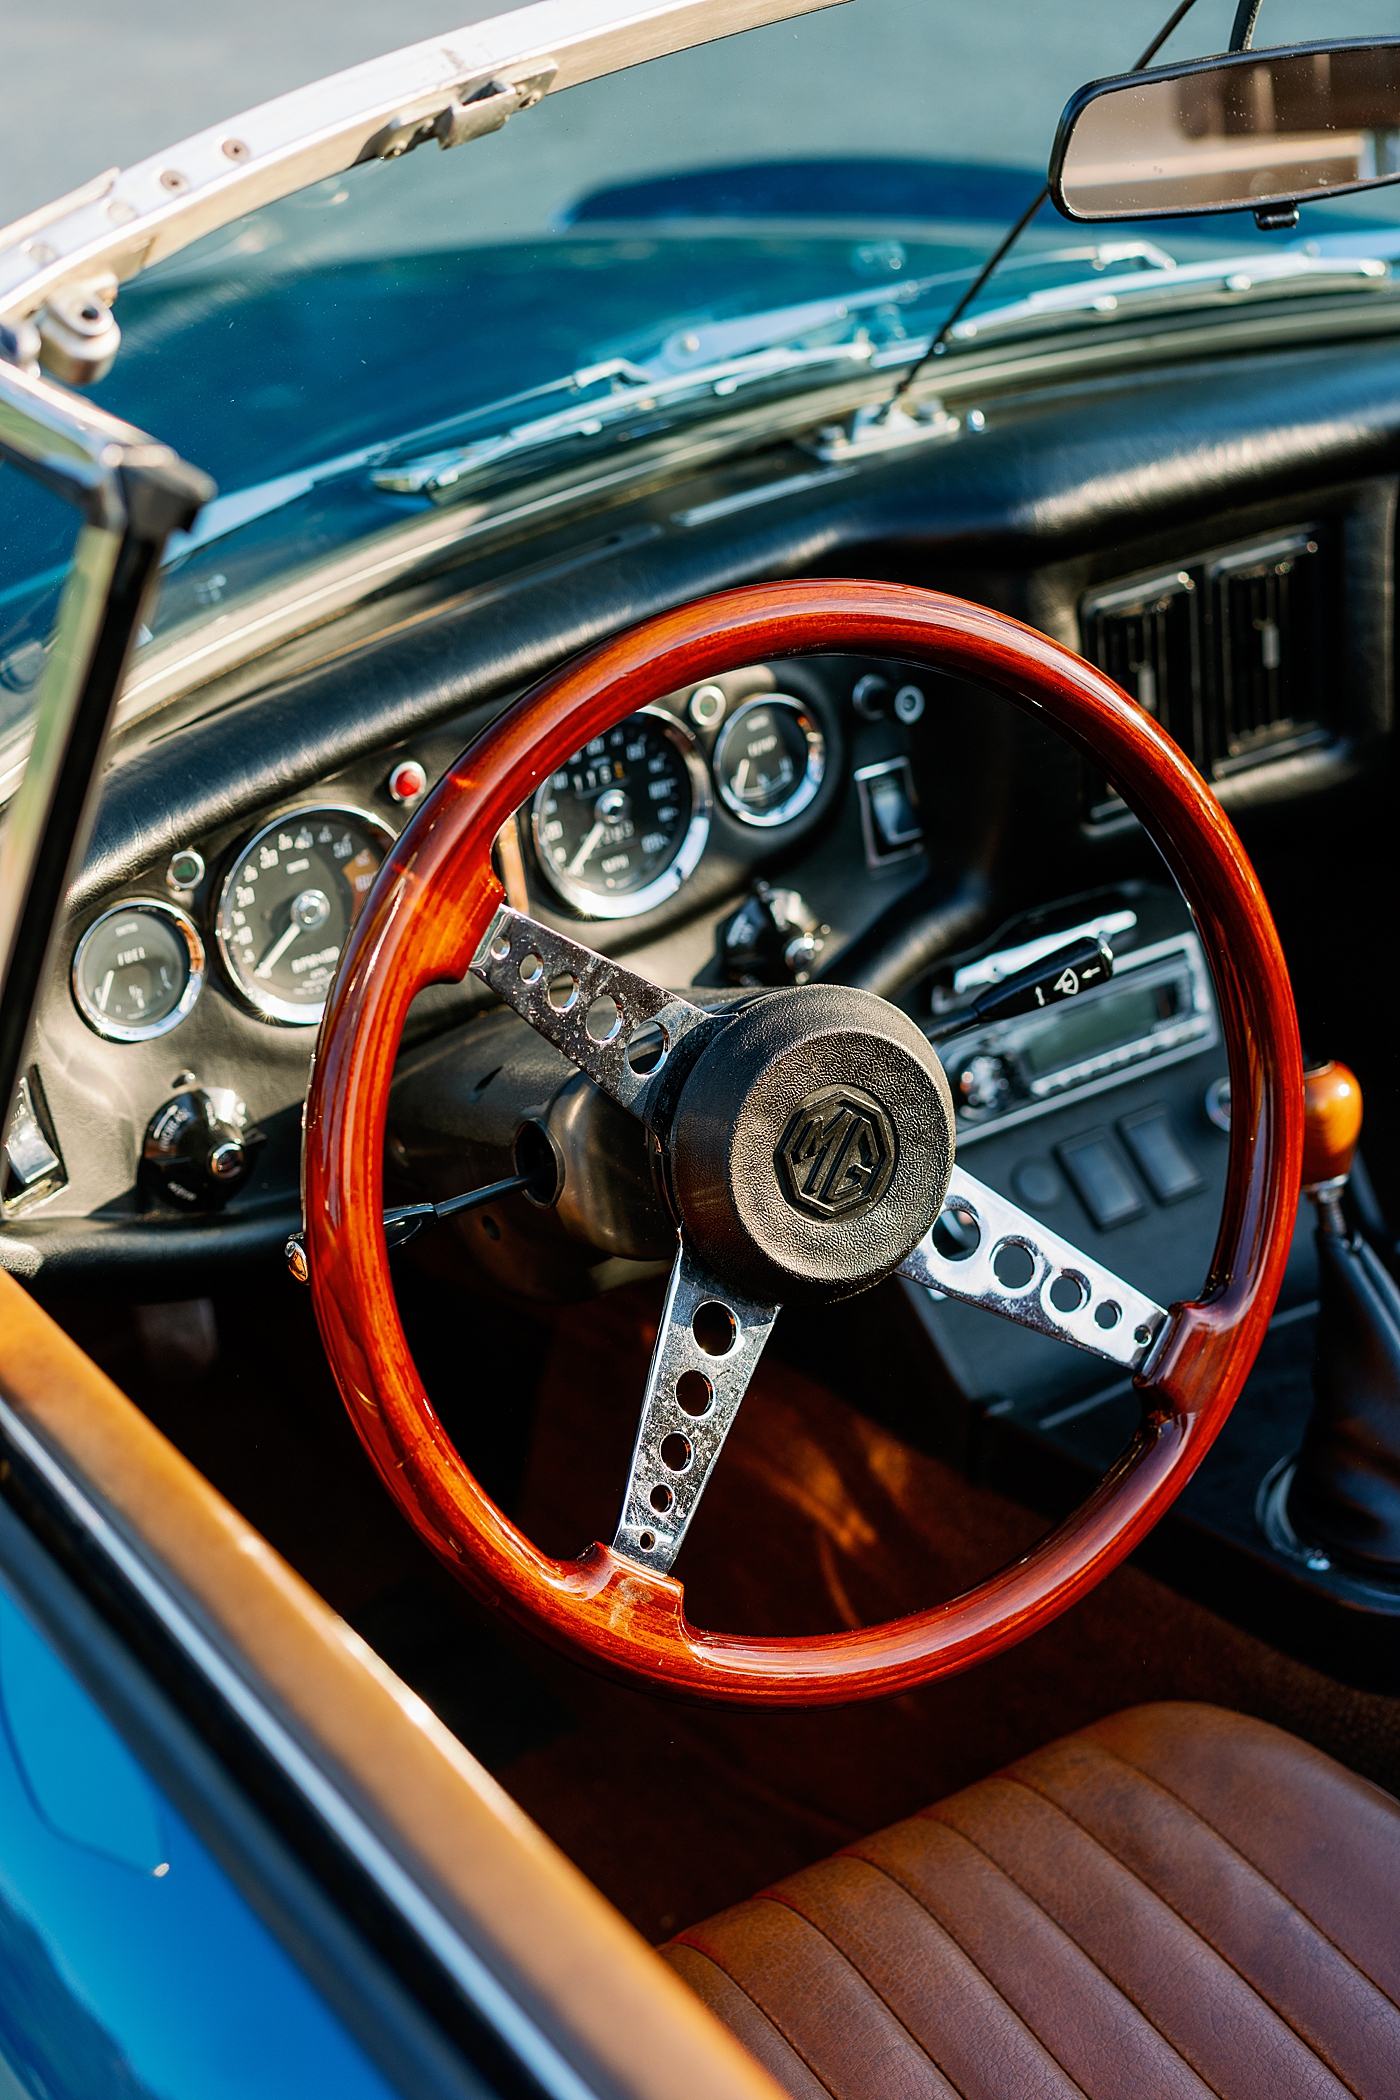  Detail of steering wheel of blue antique car | Photo by Annie Laura Photo